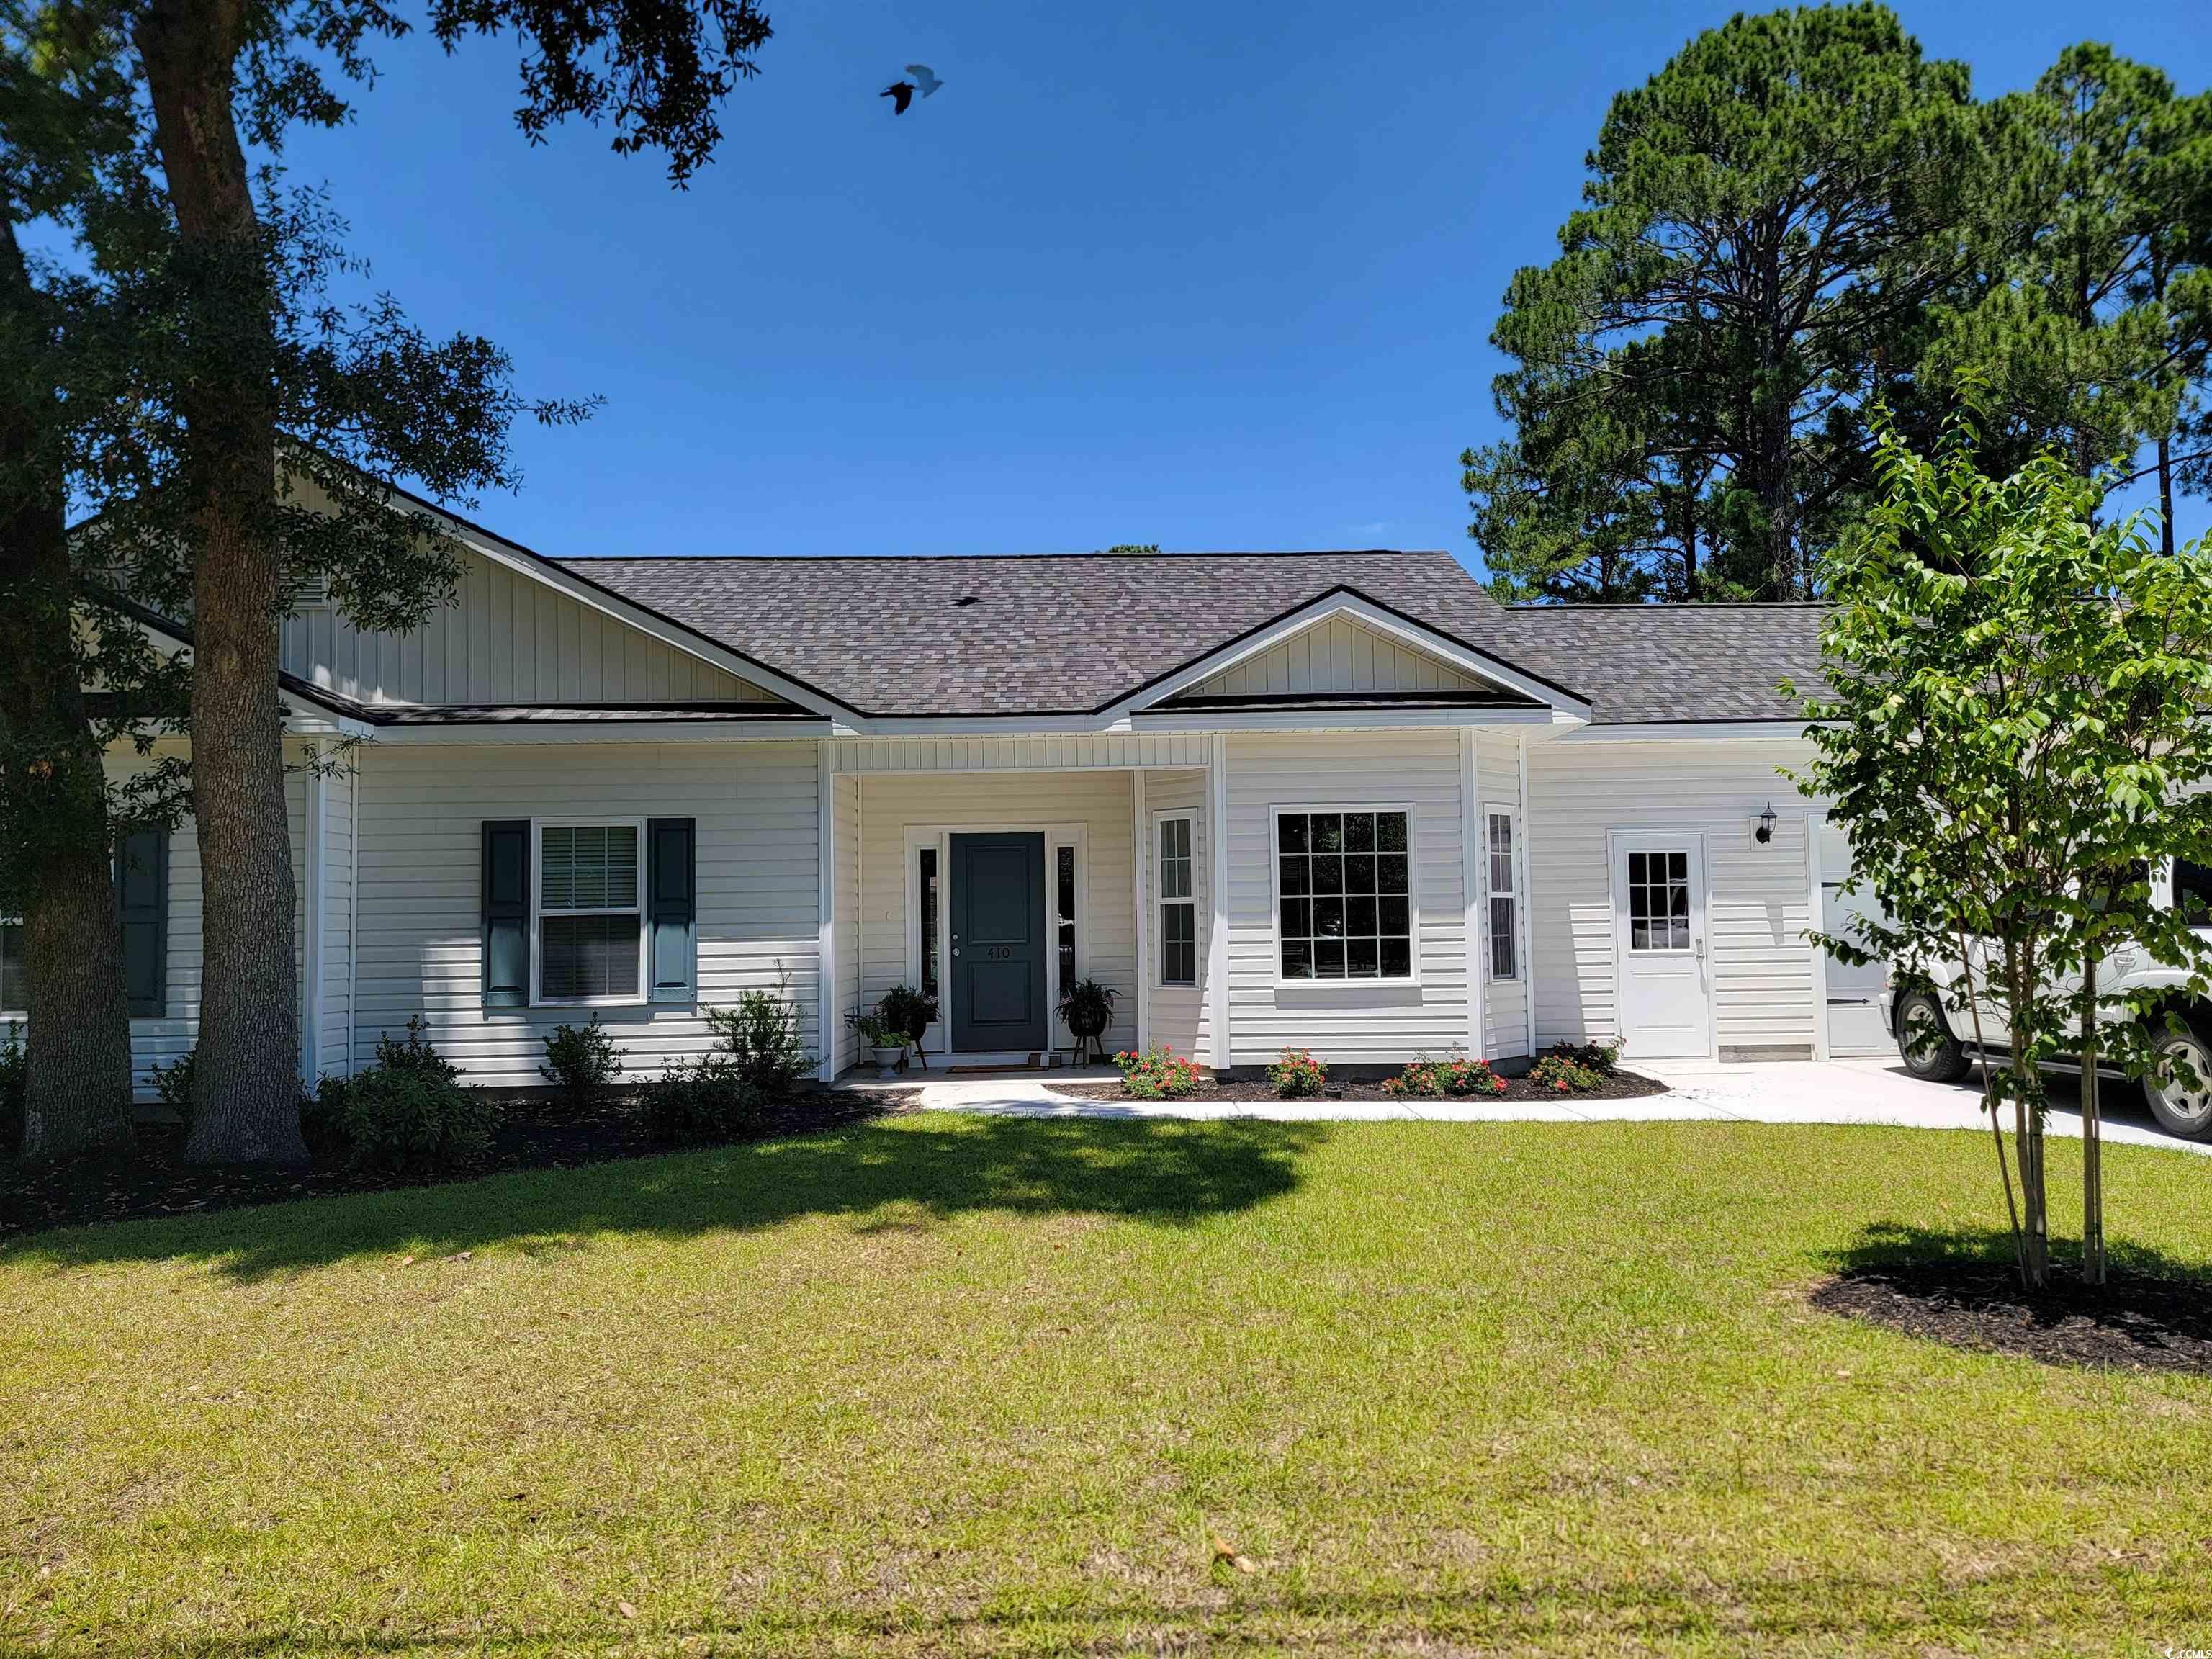 Lot 44 Rosemary St., Georgetown, SC 29440